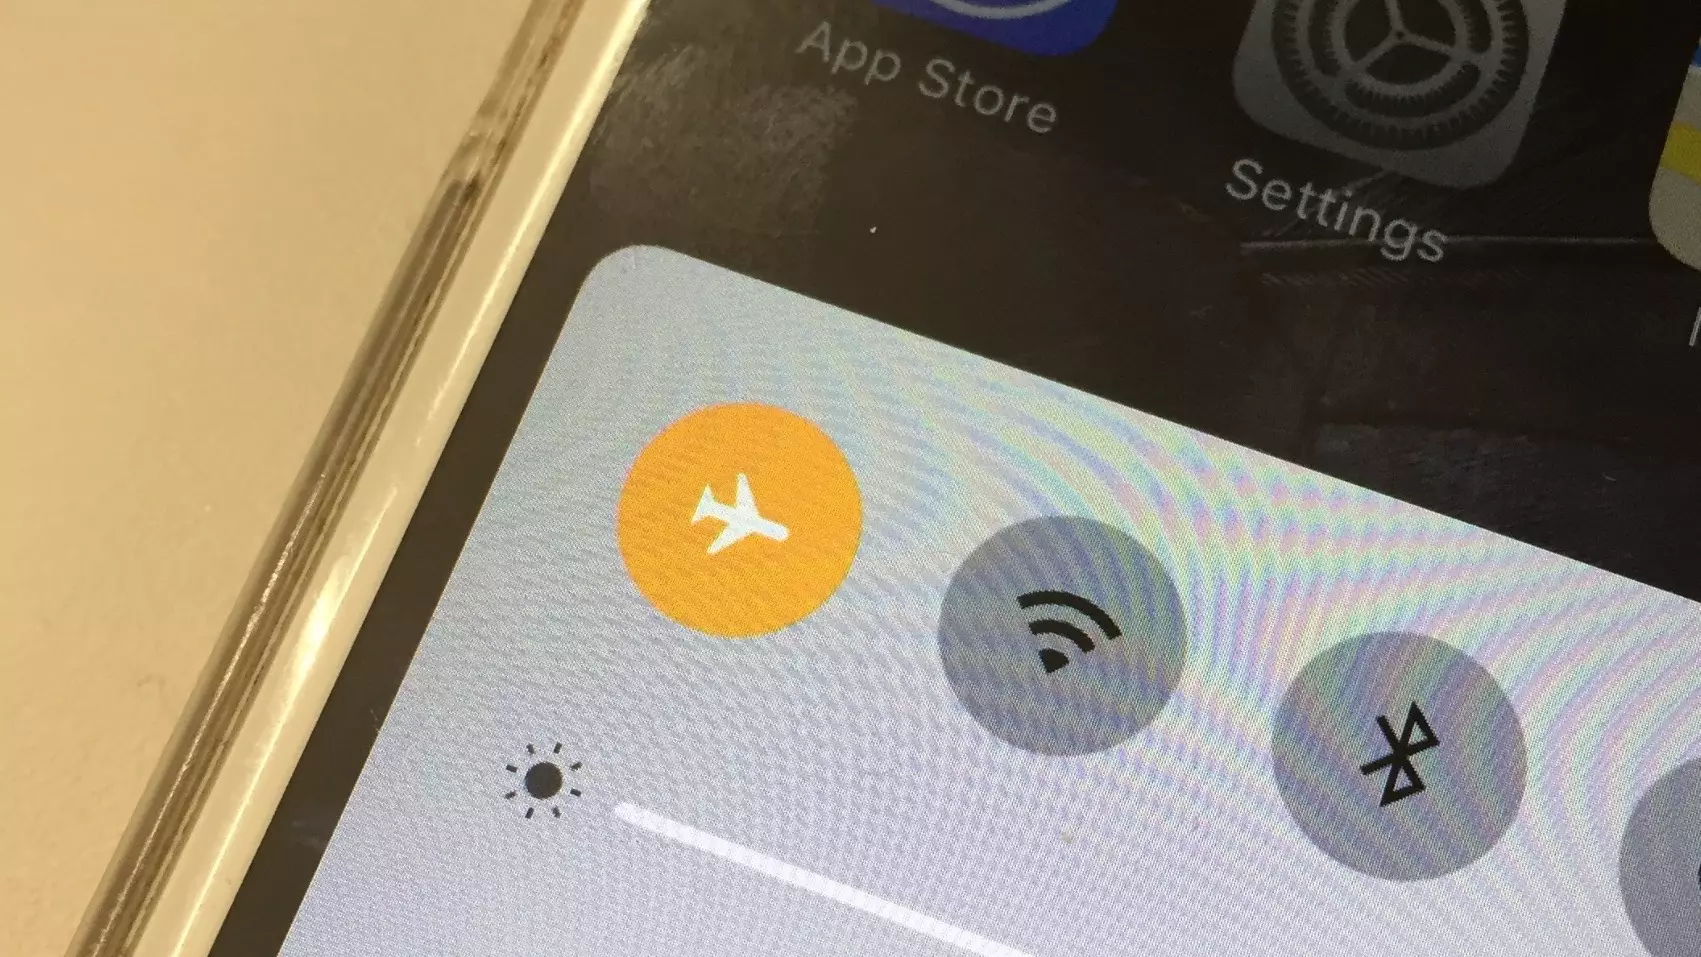 Why You Should Put Your Phone In Flight Mode While In The Air